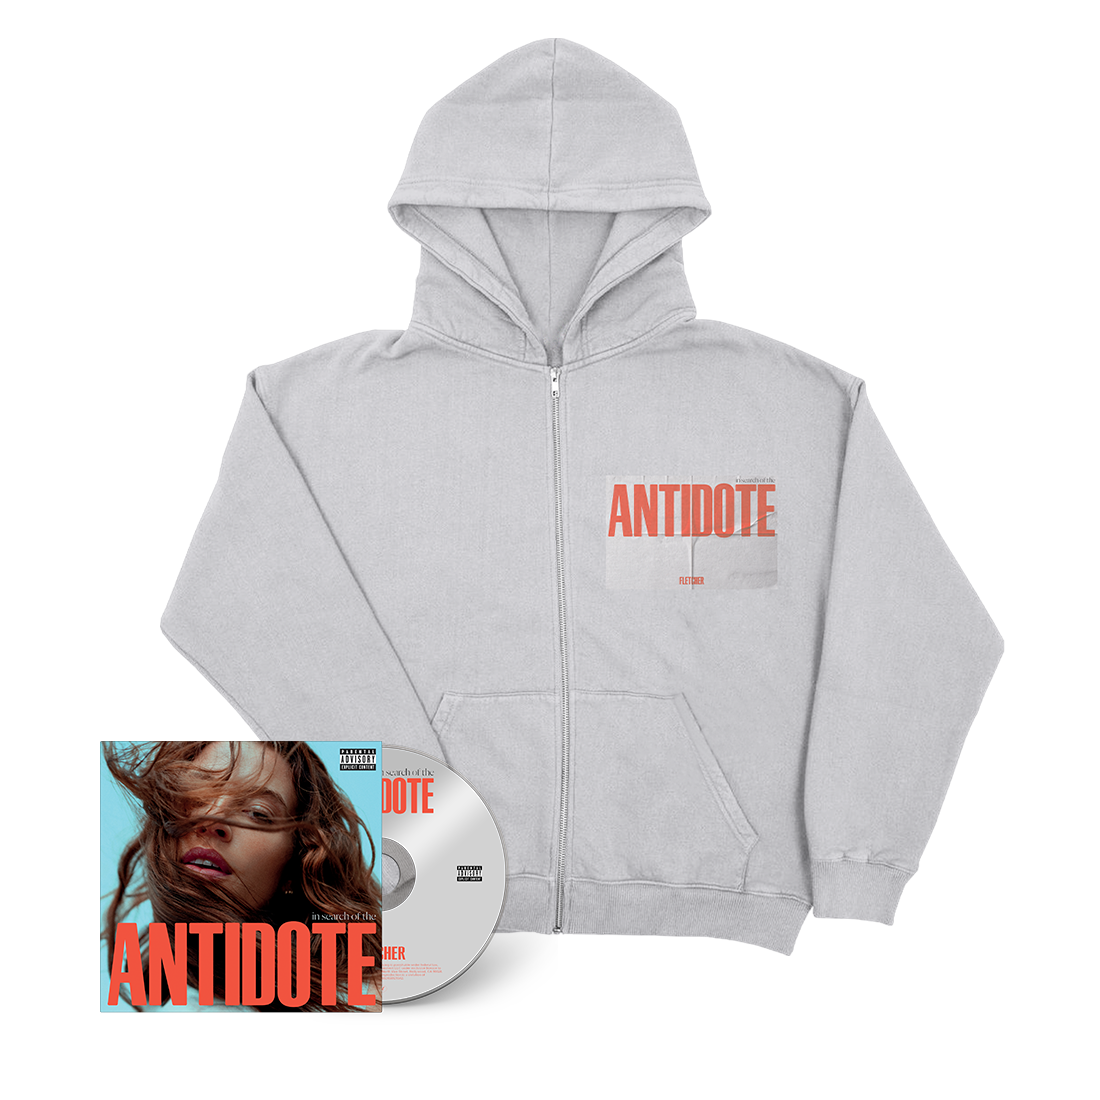 In Search Of The Antidote: CD + Antidote Cover Hoodie